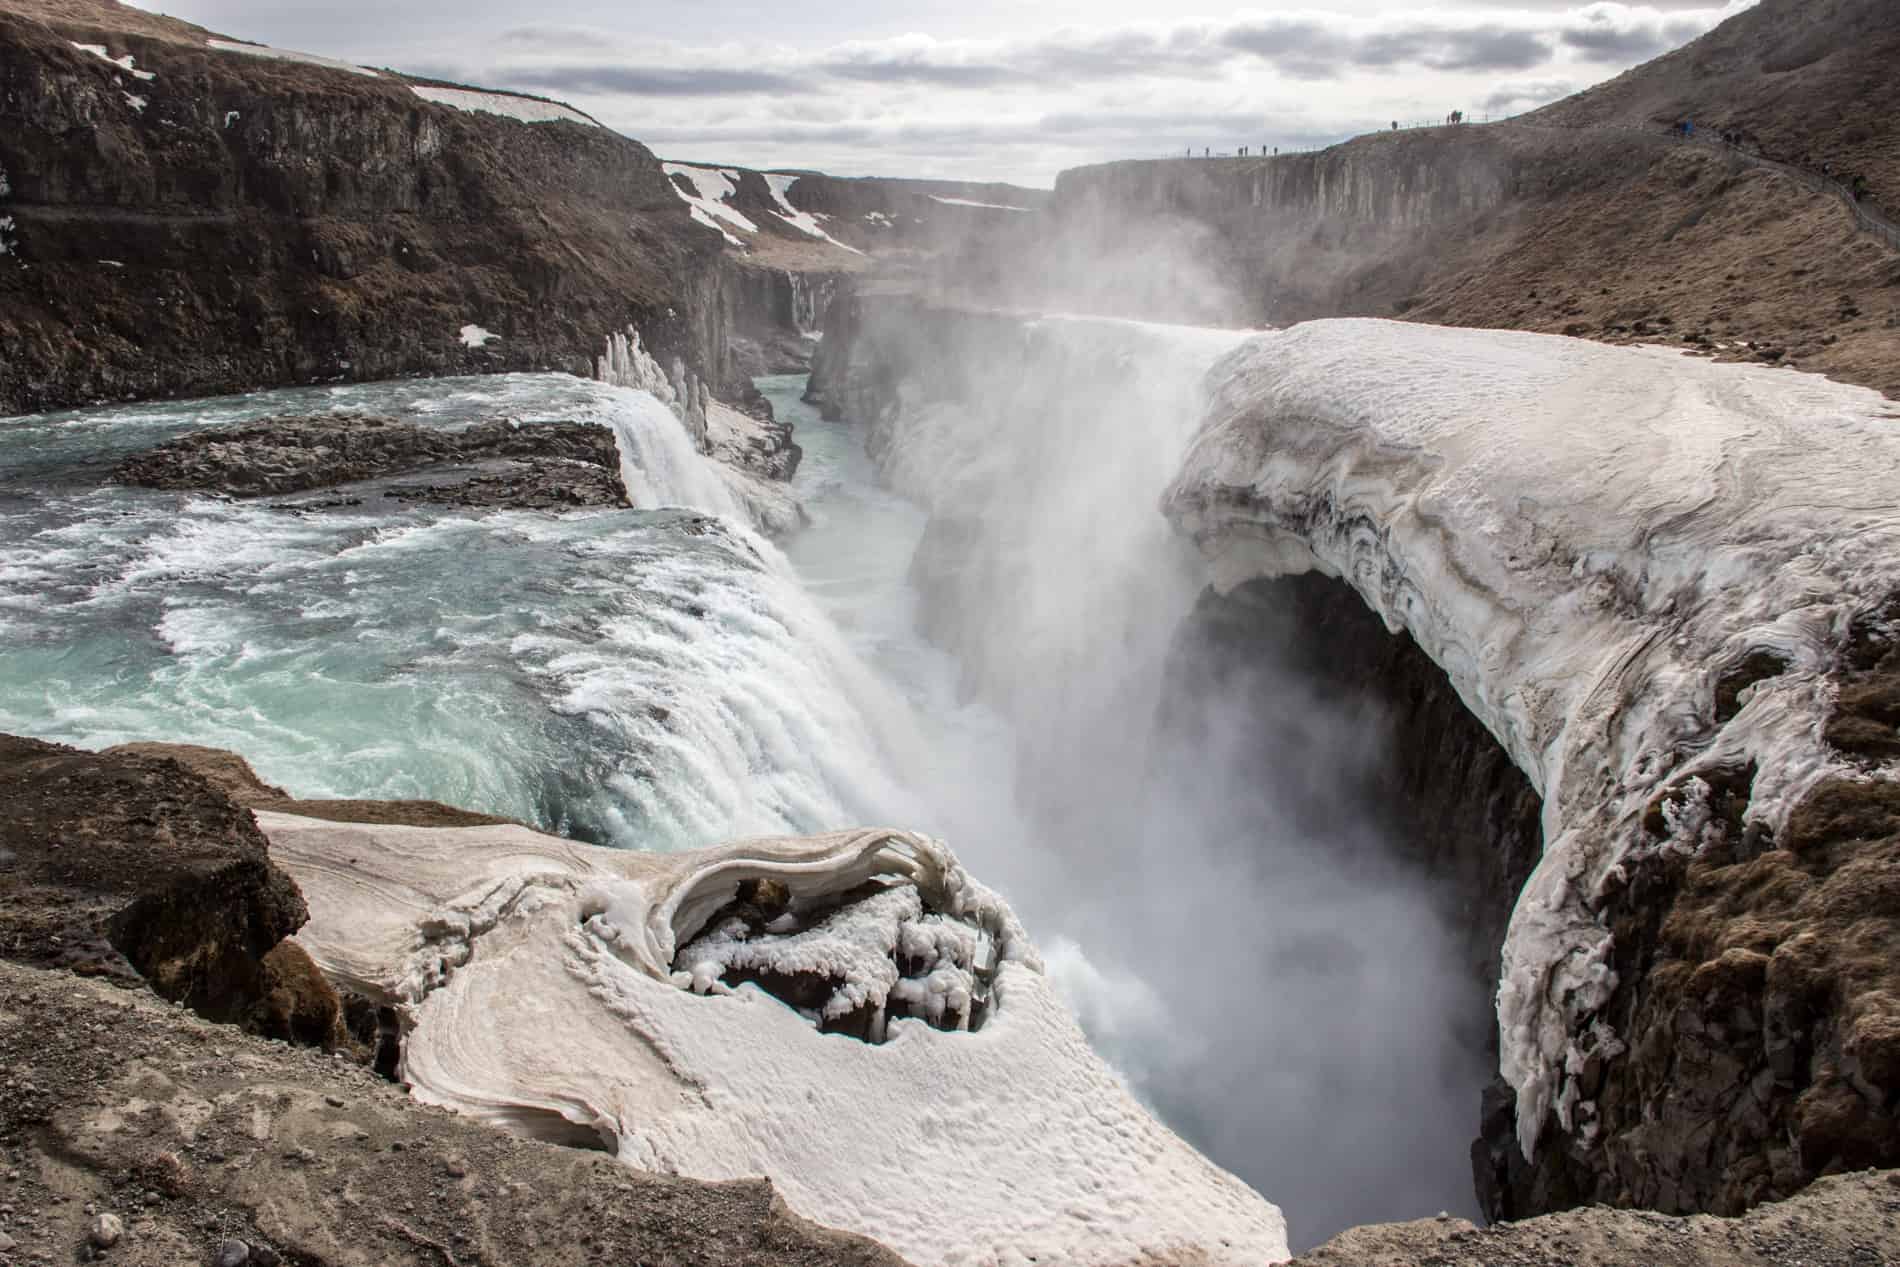 Cascading water falls between rock walls at the Gullfoss waterfall in Iceland.